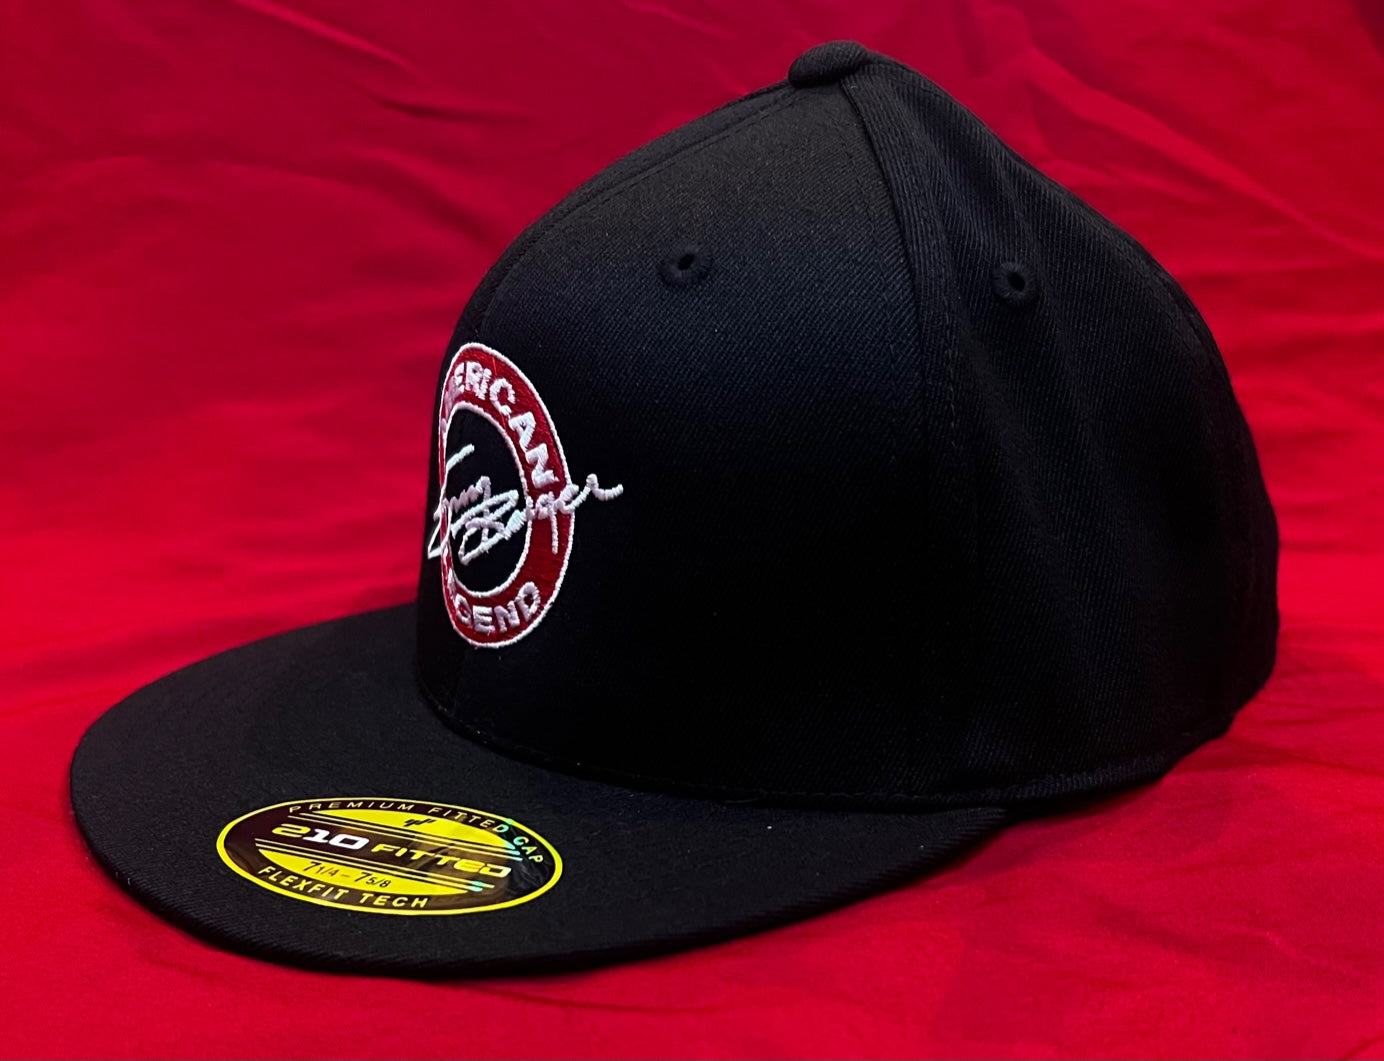 SONNY AMERICAN LEGEND FITTED HATS